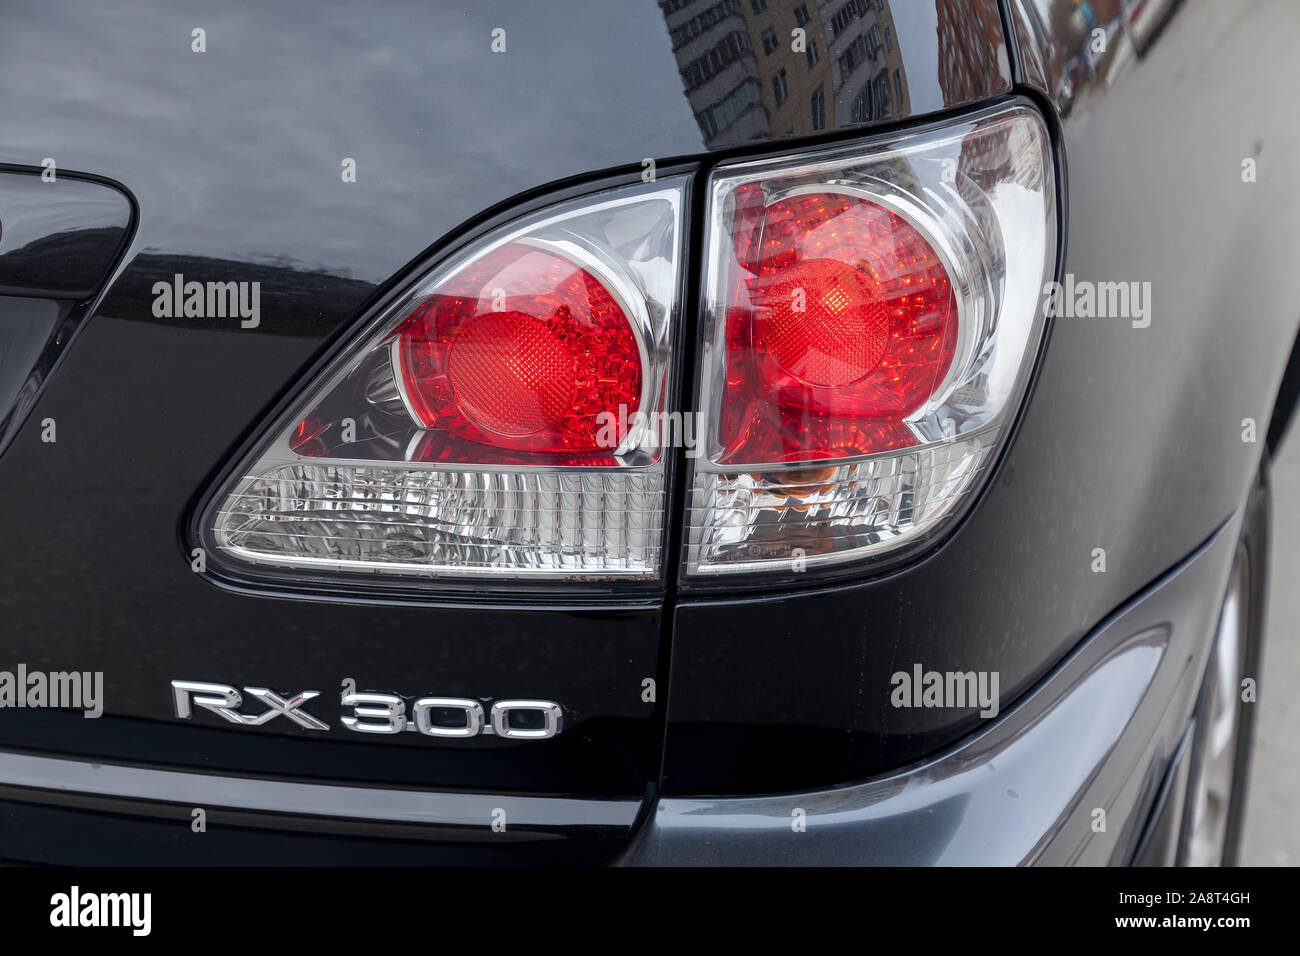 Novosibirsk, Russia - 11.05.2019: Black Toyota Harrier or Lexus RX300 1997 year rear taillamp view with gray interior in excellent condition in a park Stock Photo